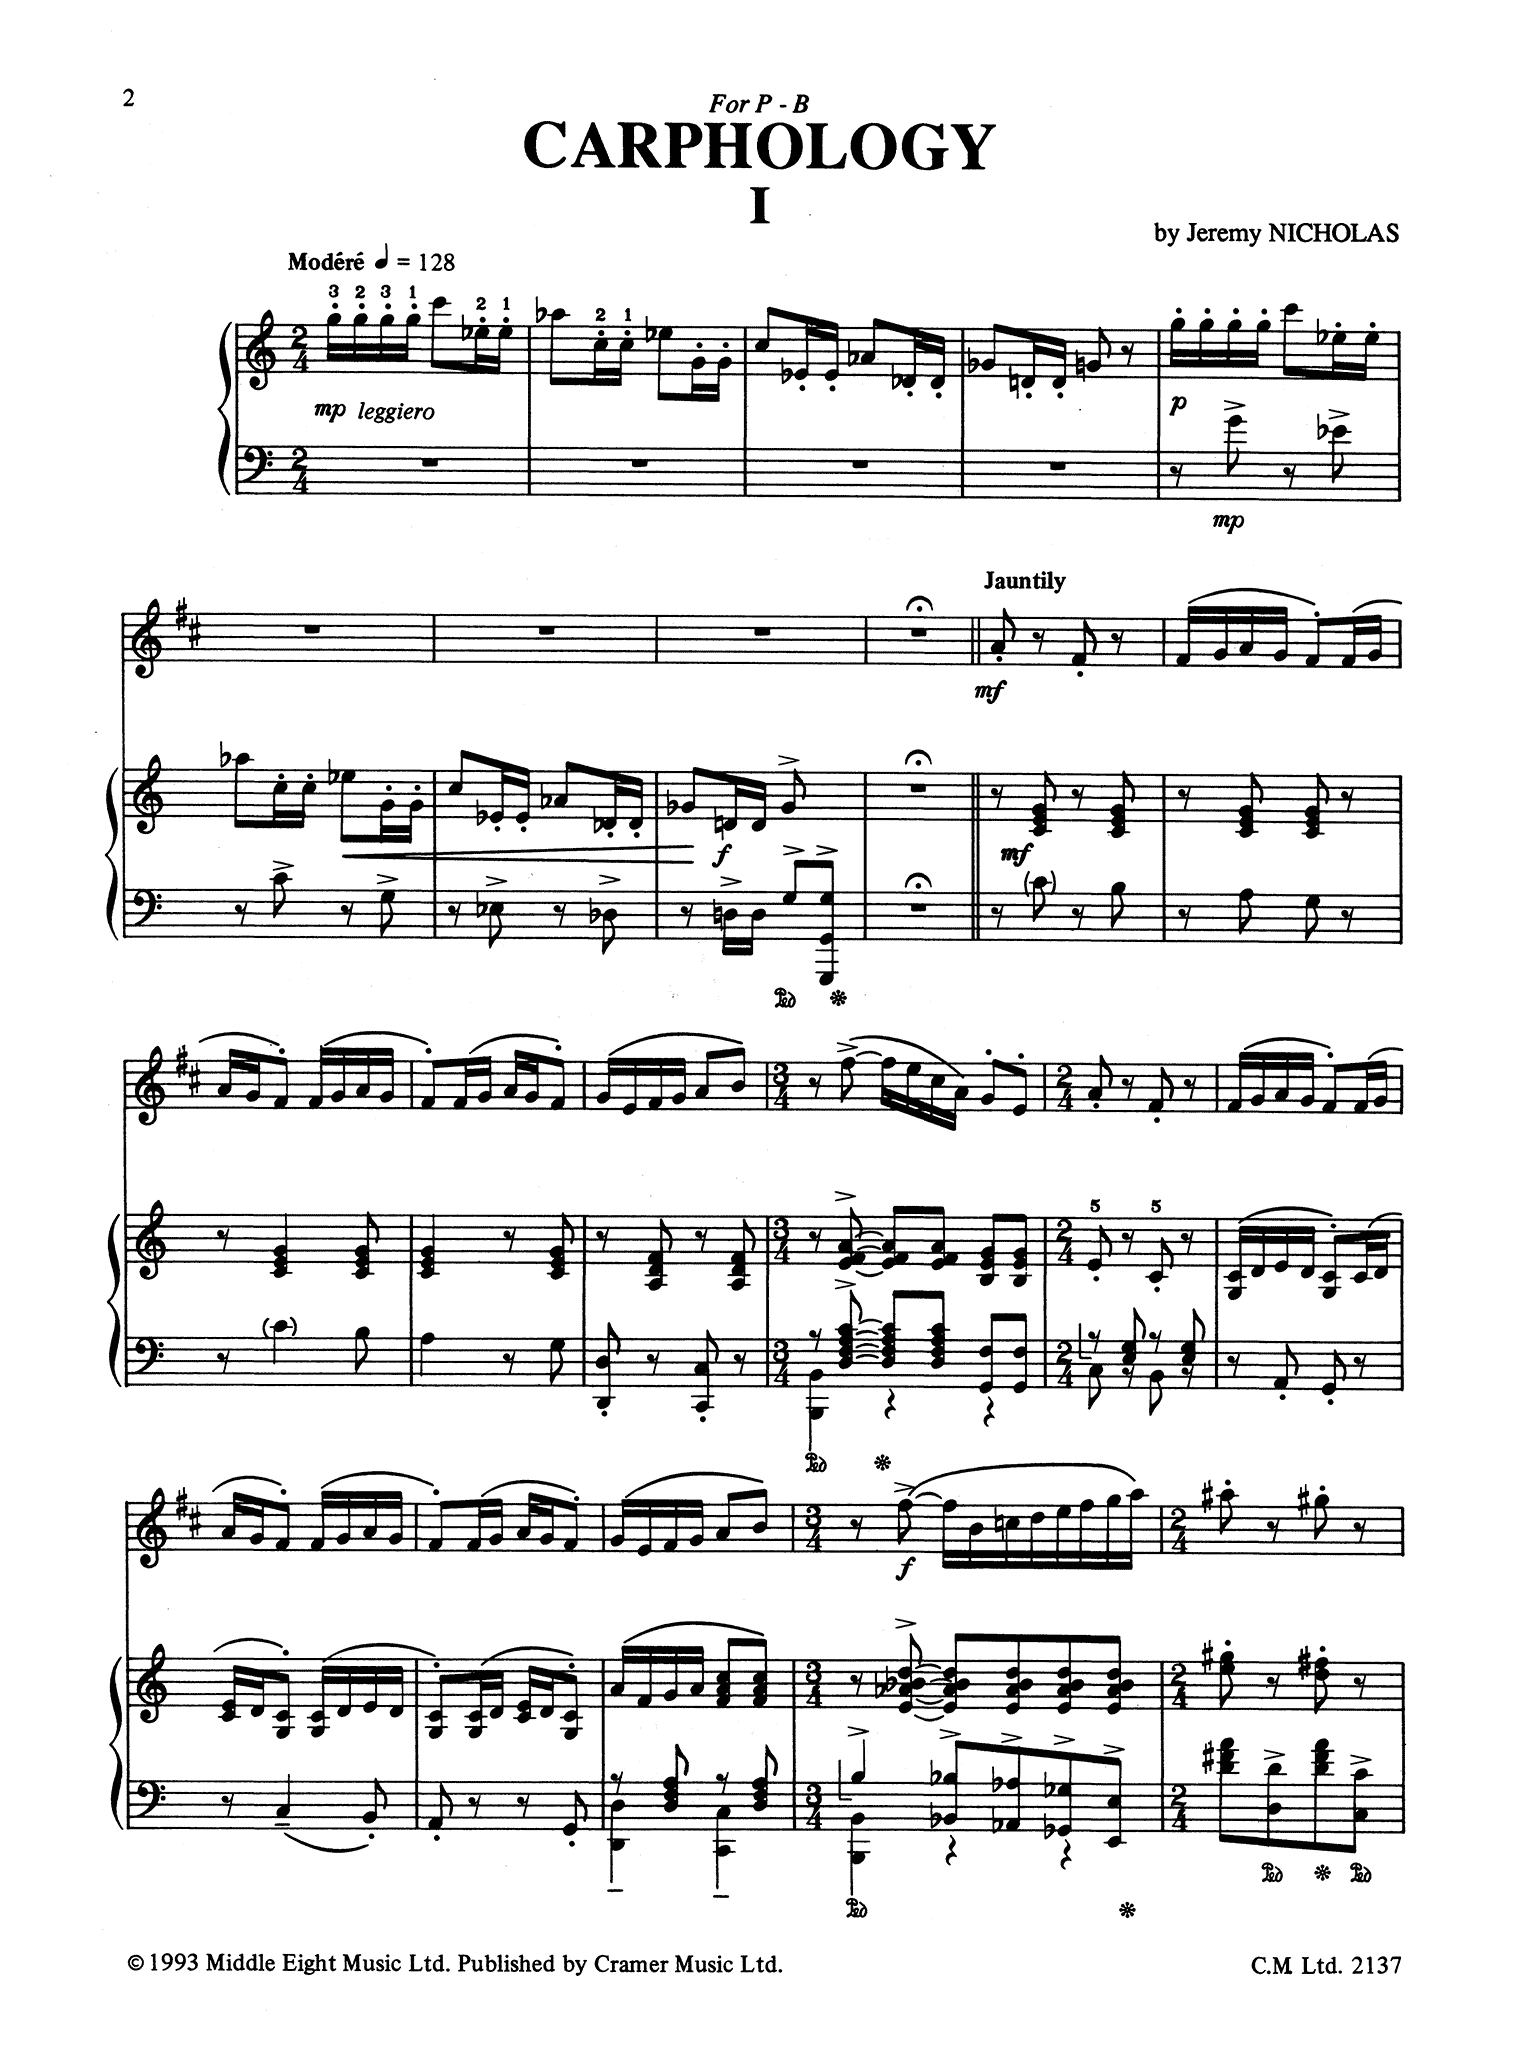 Nicholas Carphology for clarinet and piano - Movement 1